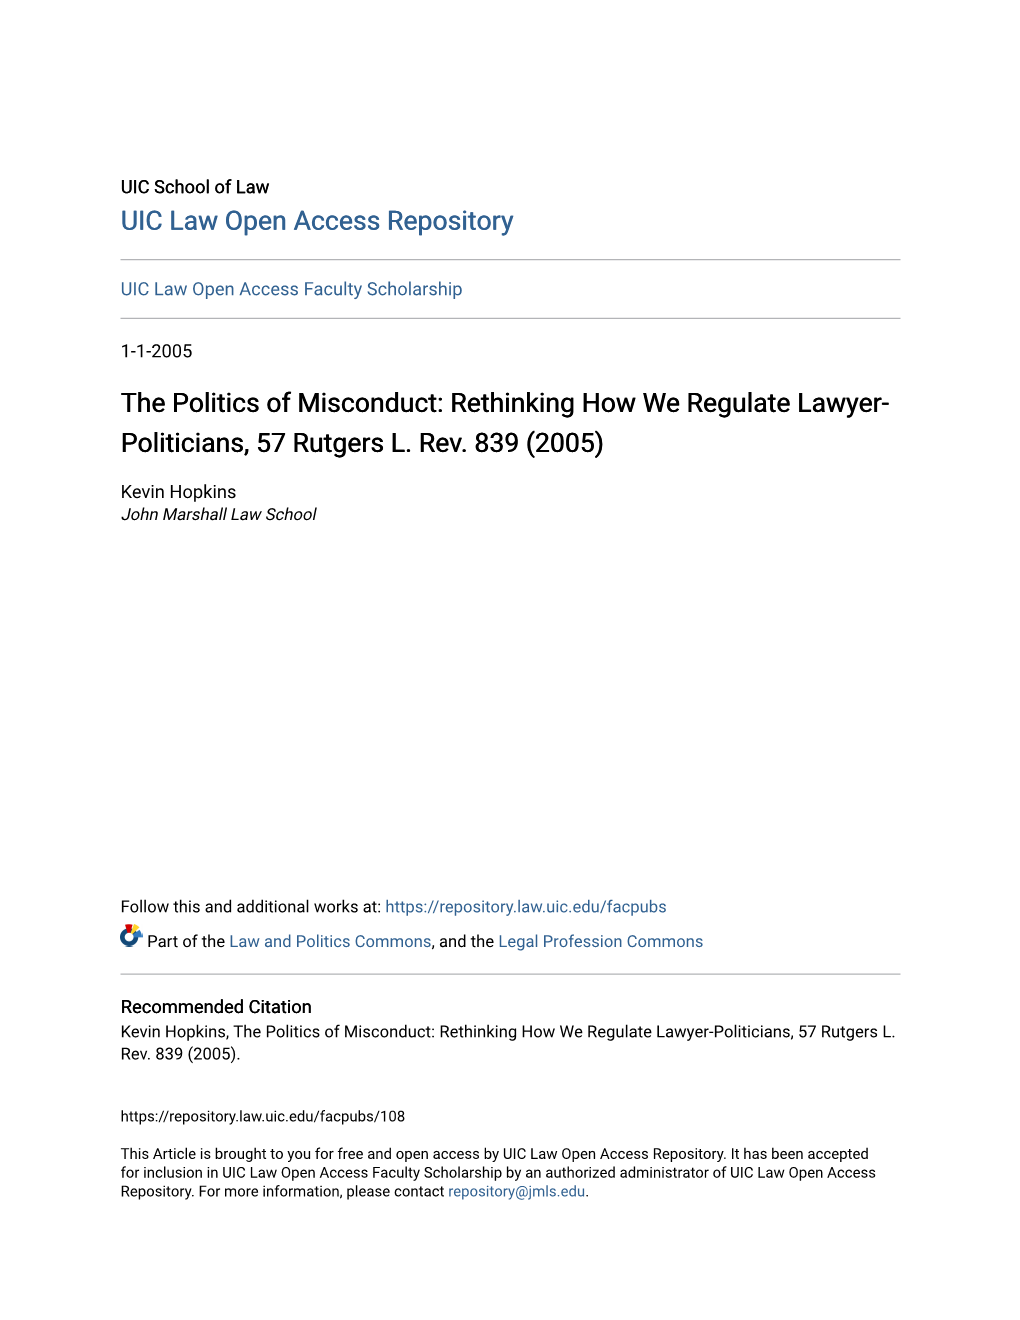 Rethinking How We Regulate Lawyer-Politicians, 57 Rutgers L